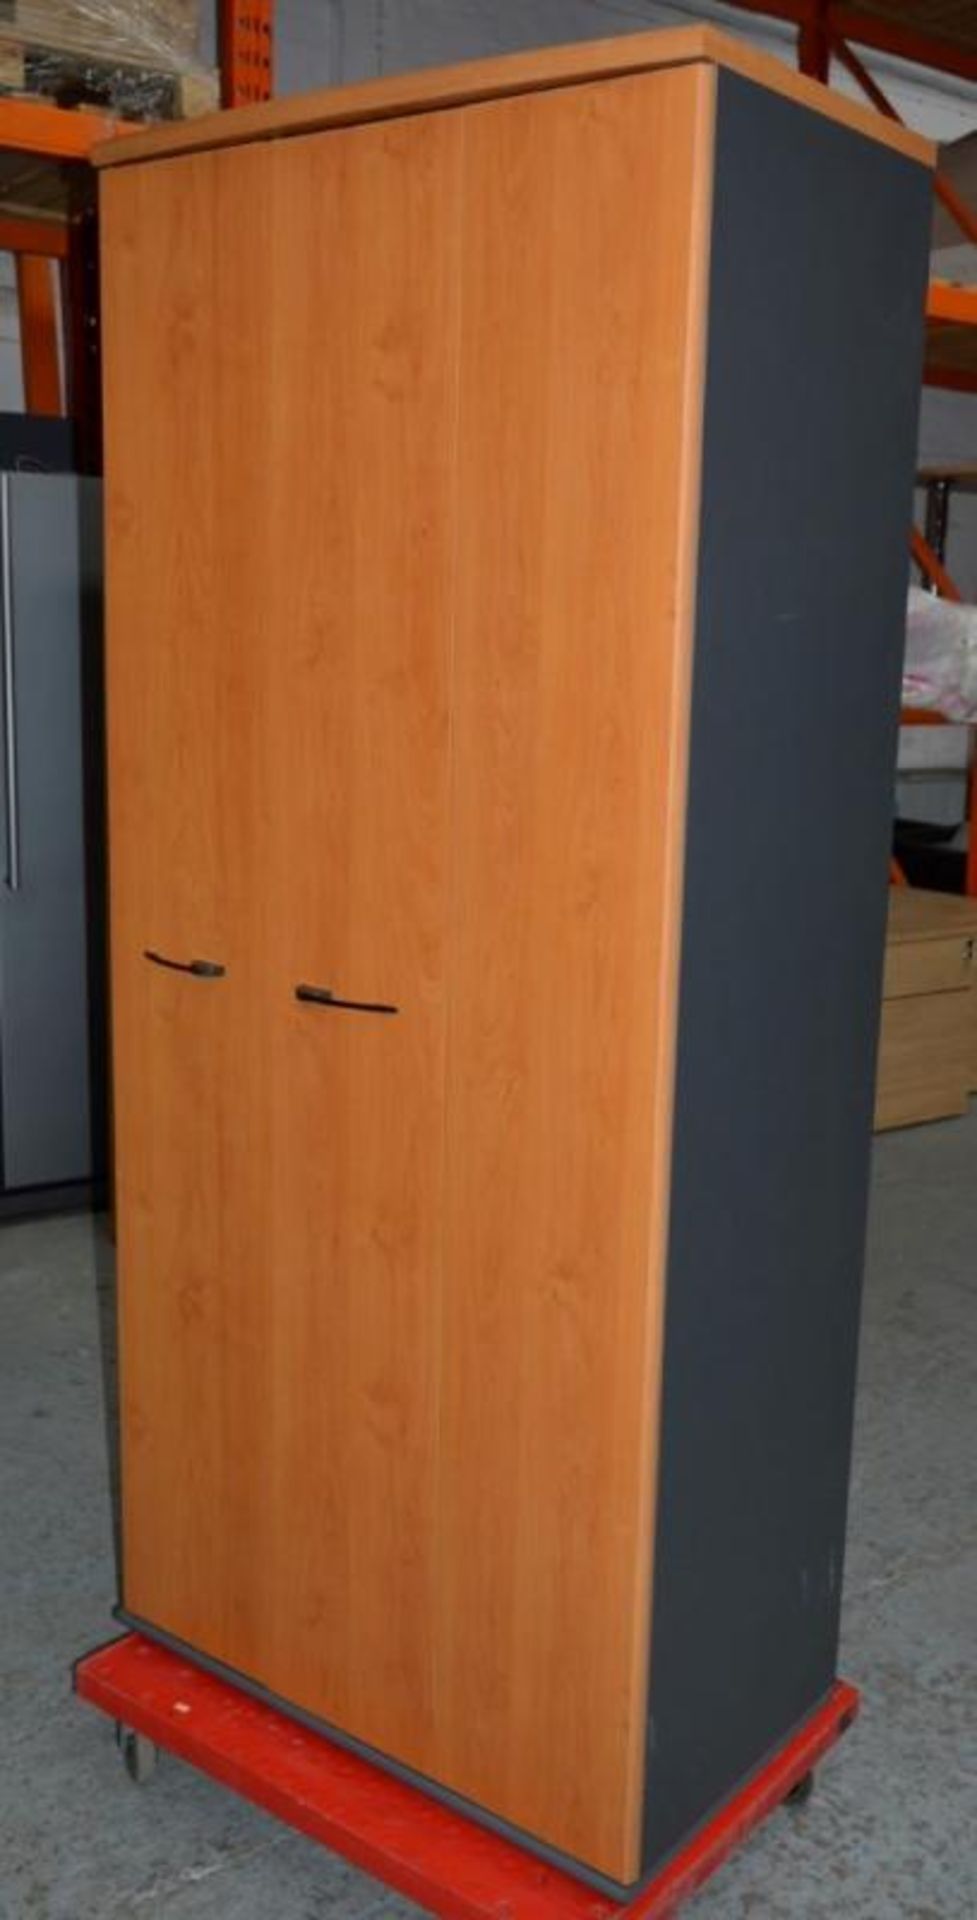 1 x Tall Upright Office Storage Cabinet - Dark Grey Unit With Cherry Wood Folding Doors - Five - Image 2 of 3